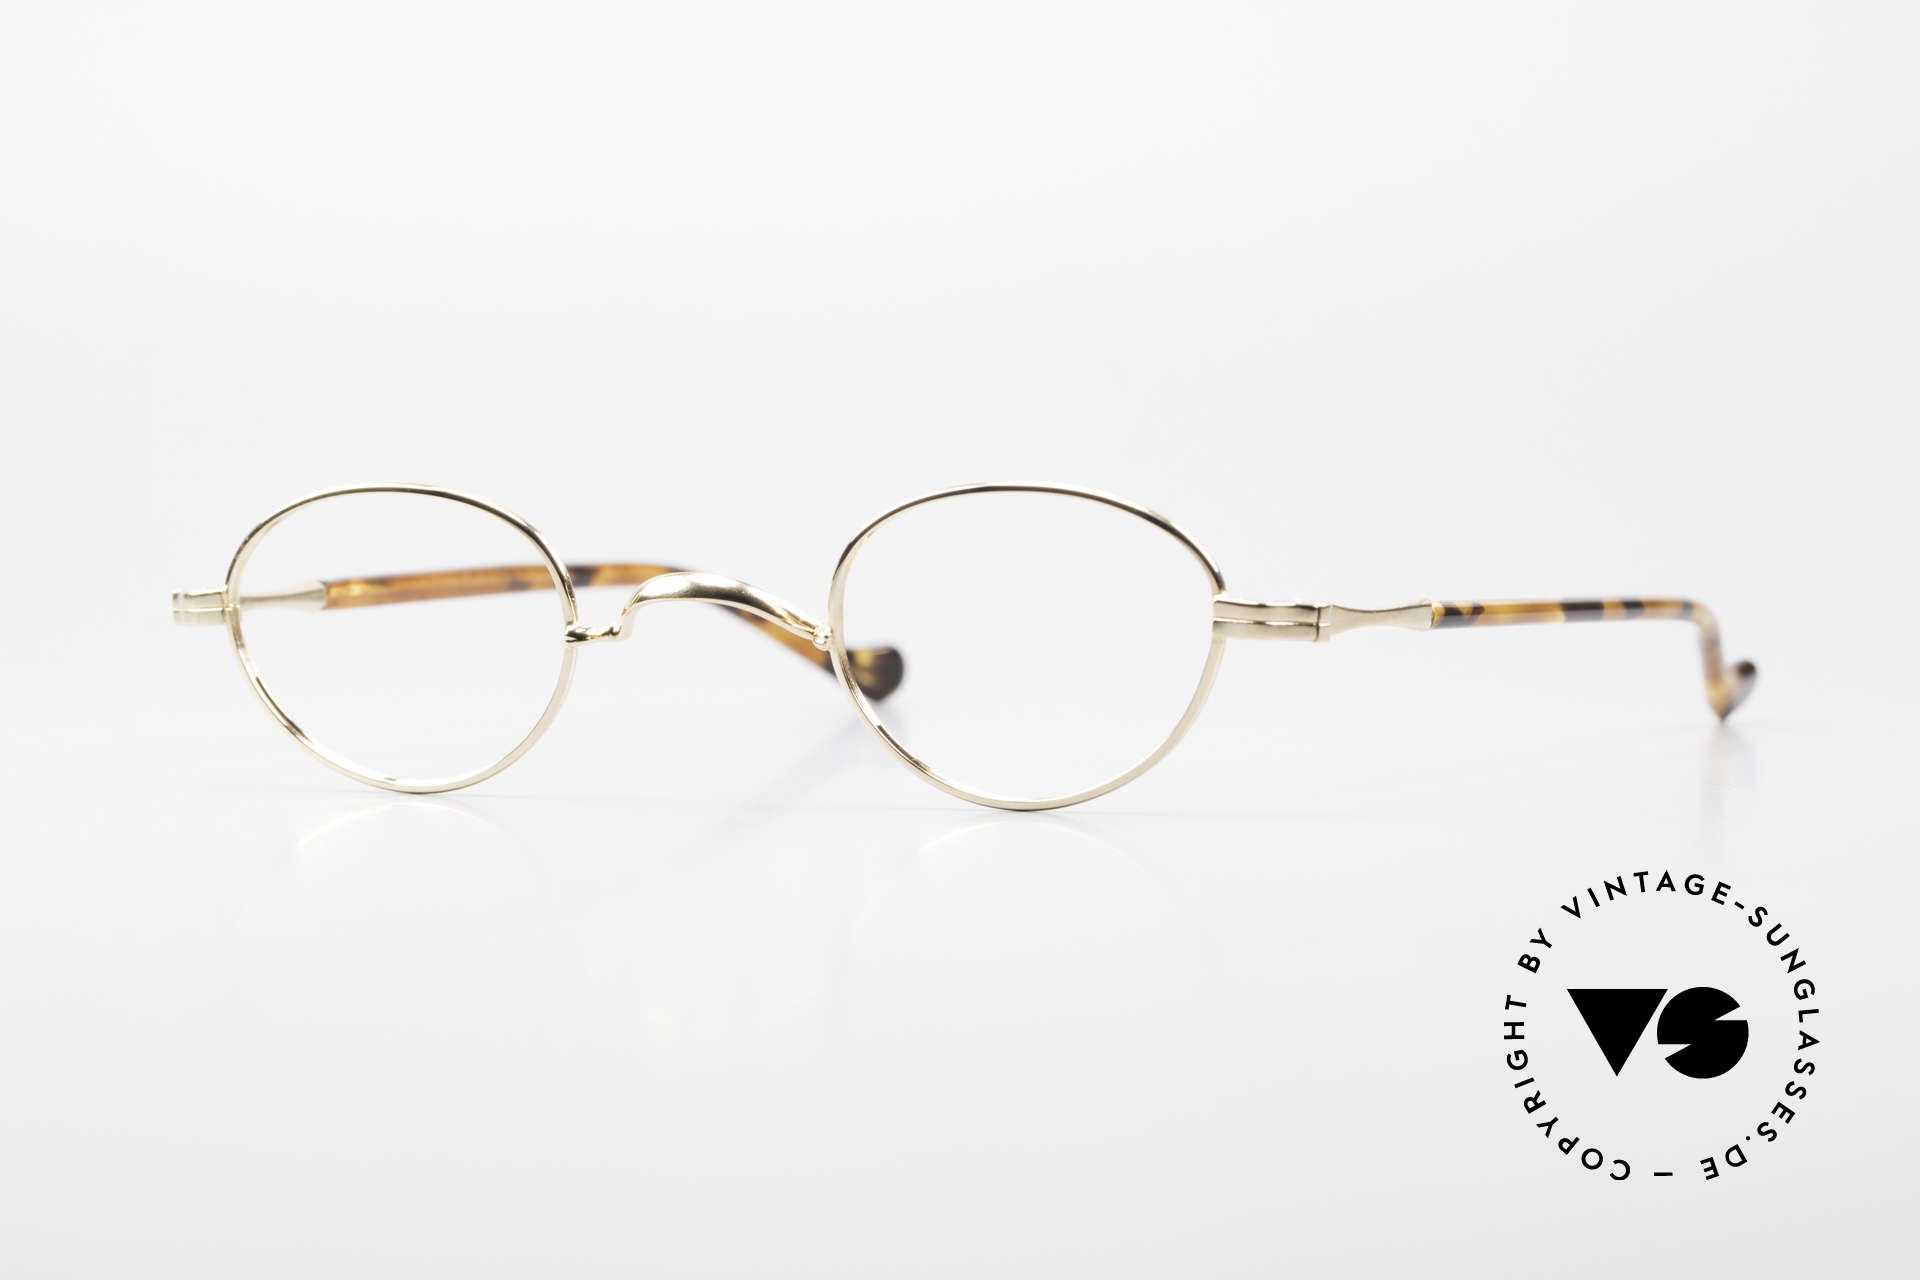 Lunor II A 03 Gold Plated Eyeglass-Frame, rare Lunor glasses of the Lunor II-A series (A = acetate), Made for Men and Women